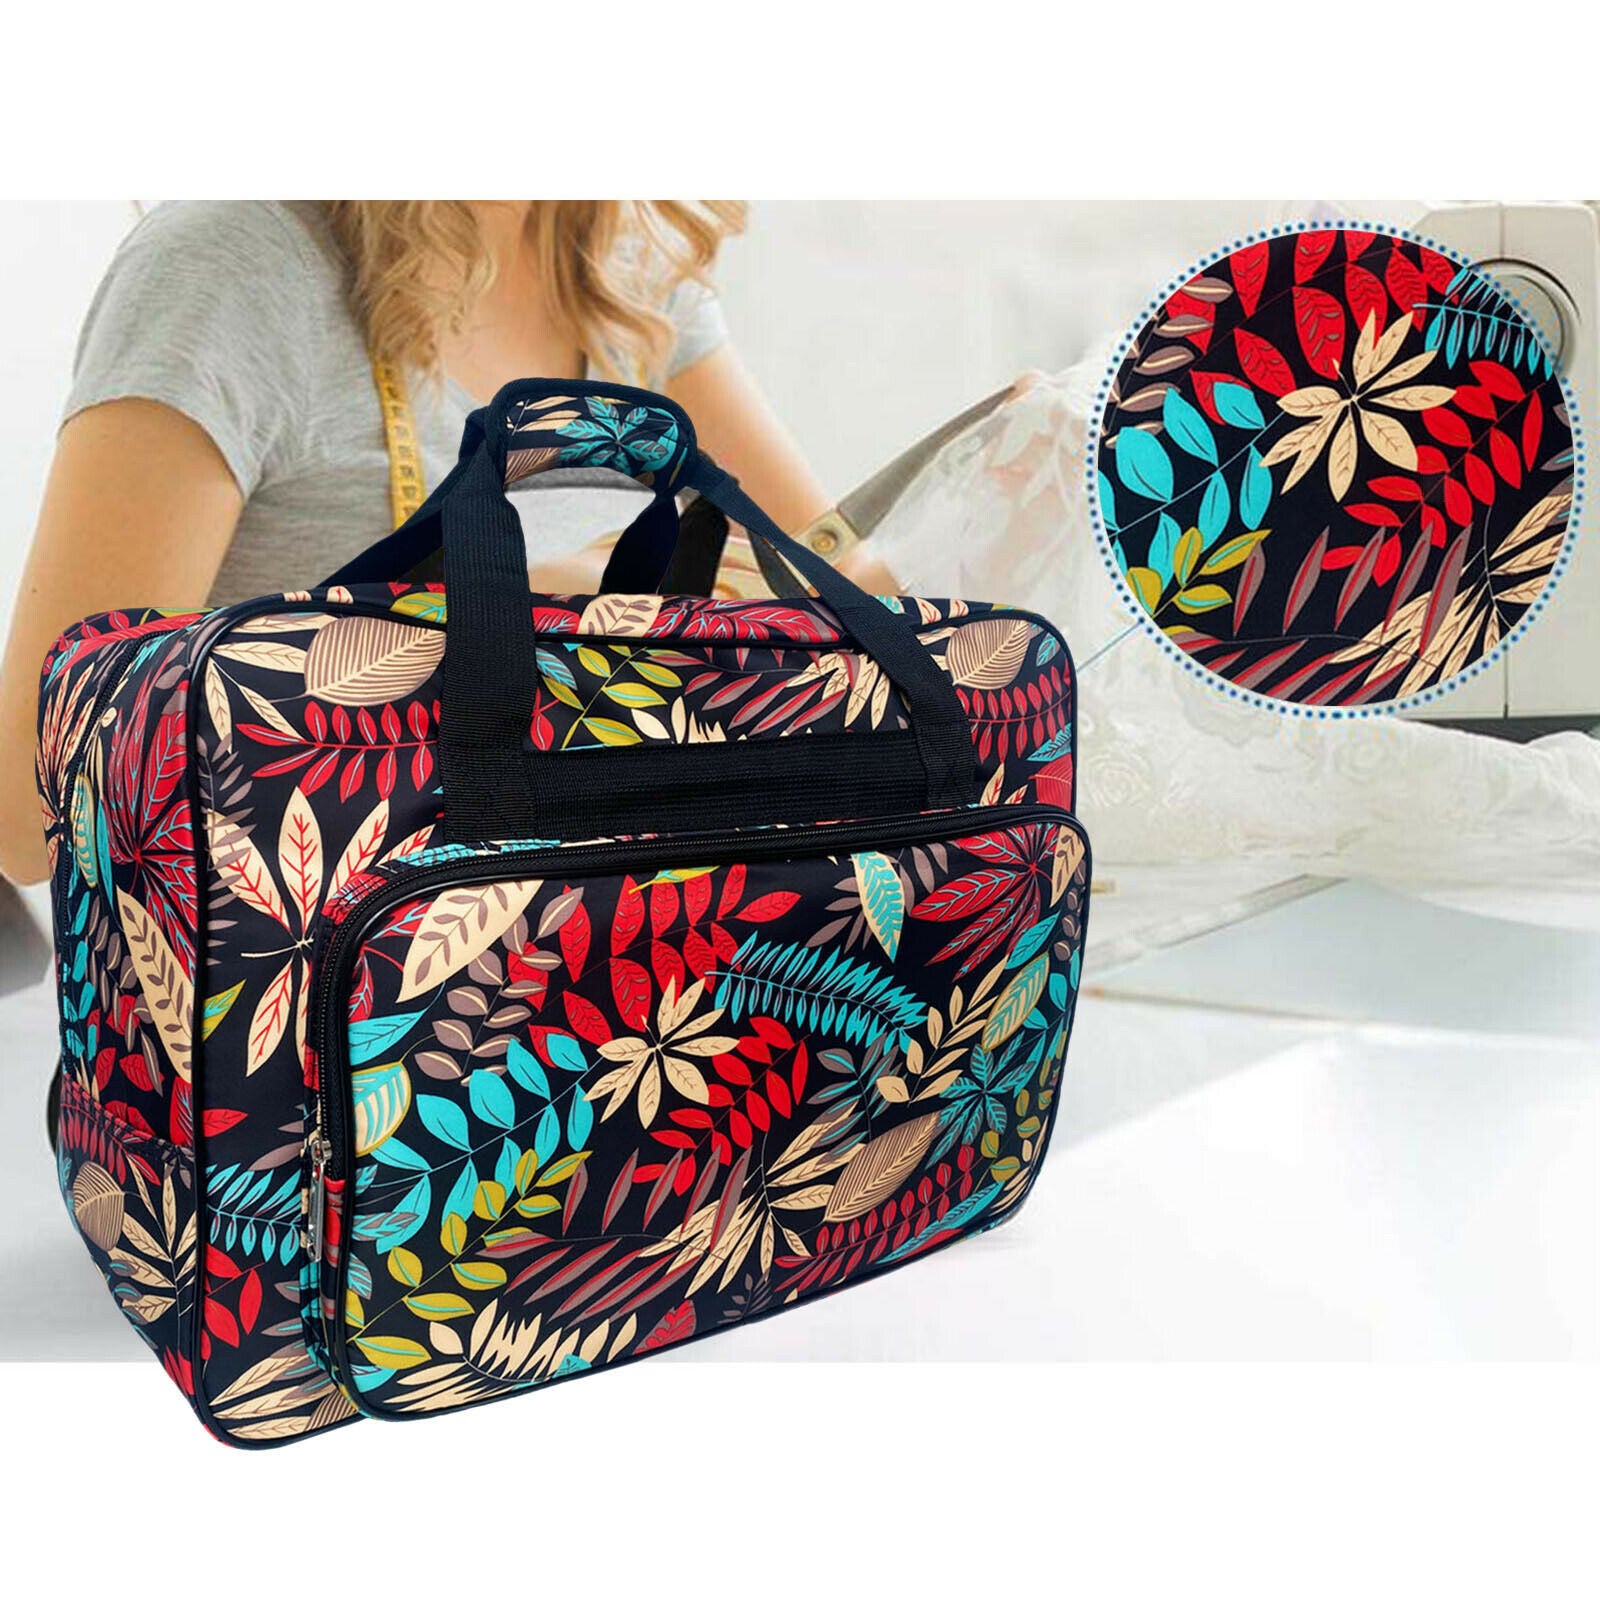 Sewing Machine Carry Bag 46x23x32cm Sew Machine Tote Universal Carrying Case